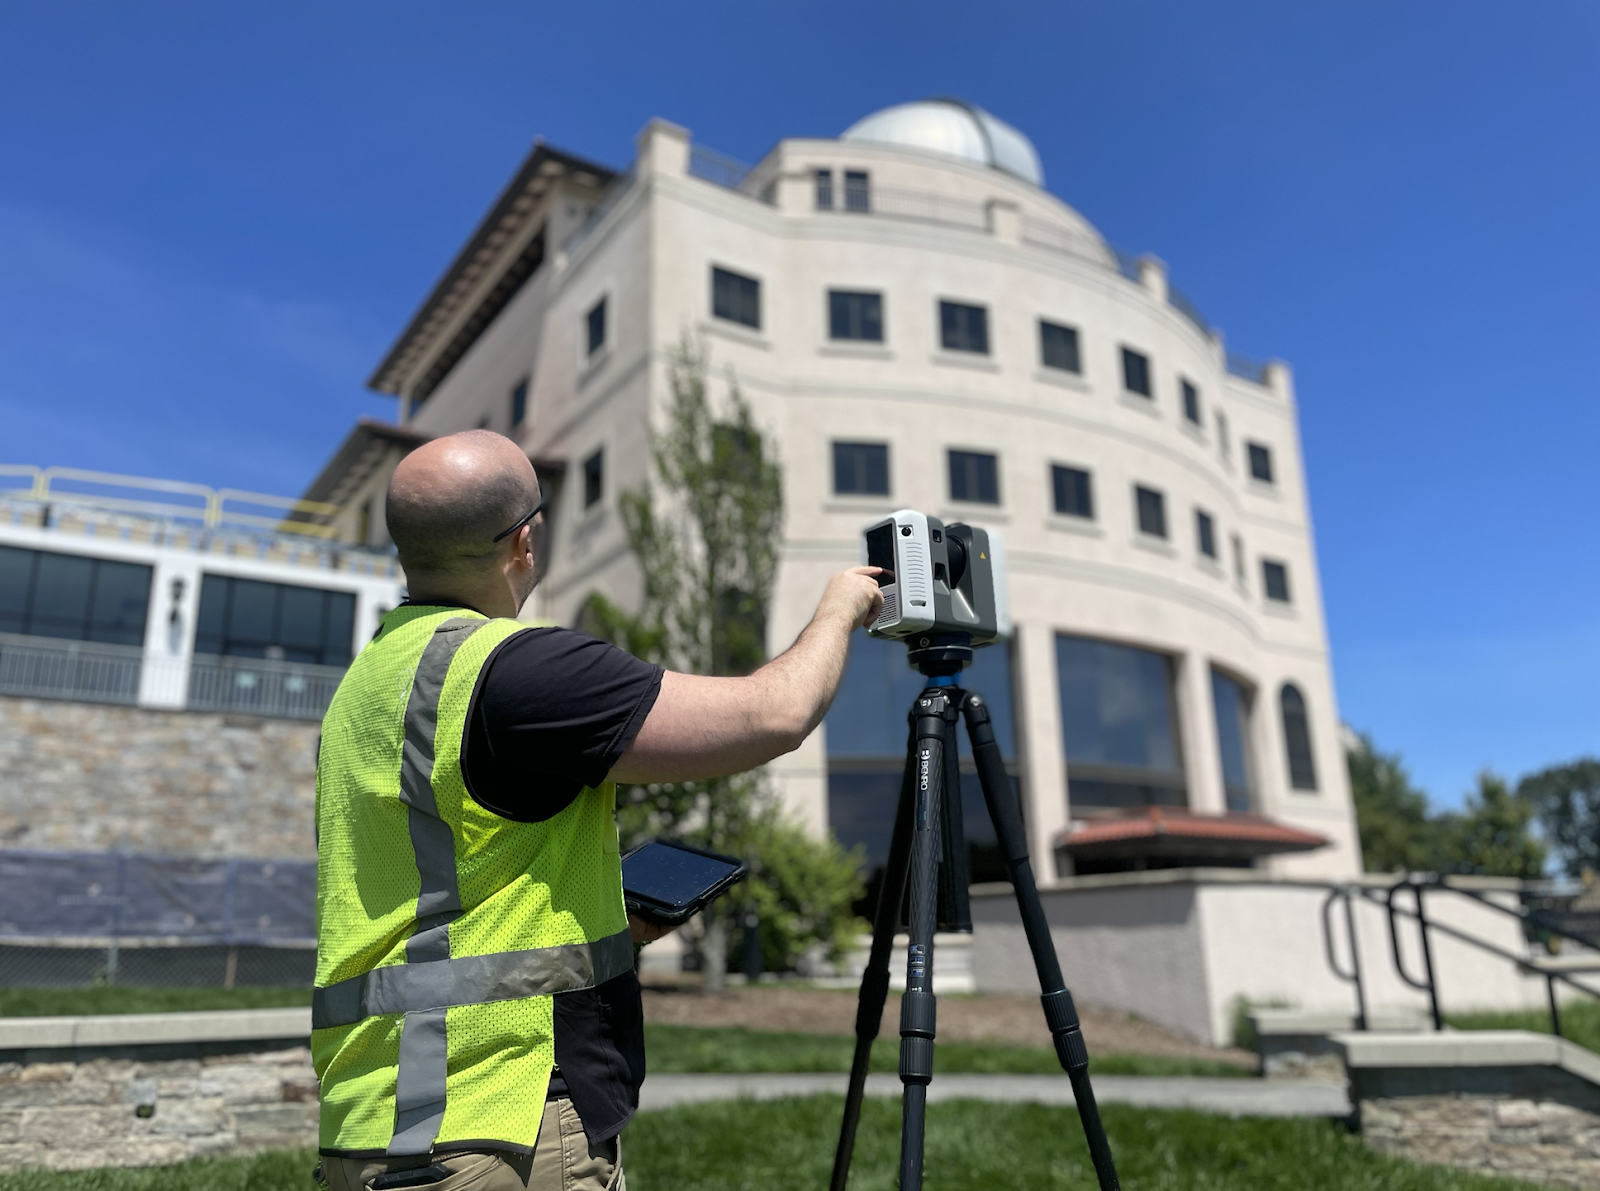 Mike Remond, Senior Operations Associate, utilizing the Leica RTC360 laser scanning on-site at Dexter-Southfield Academy